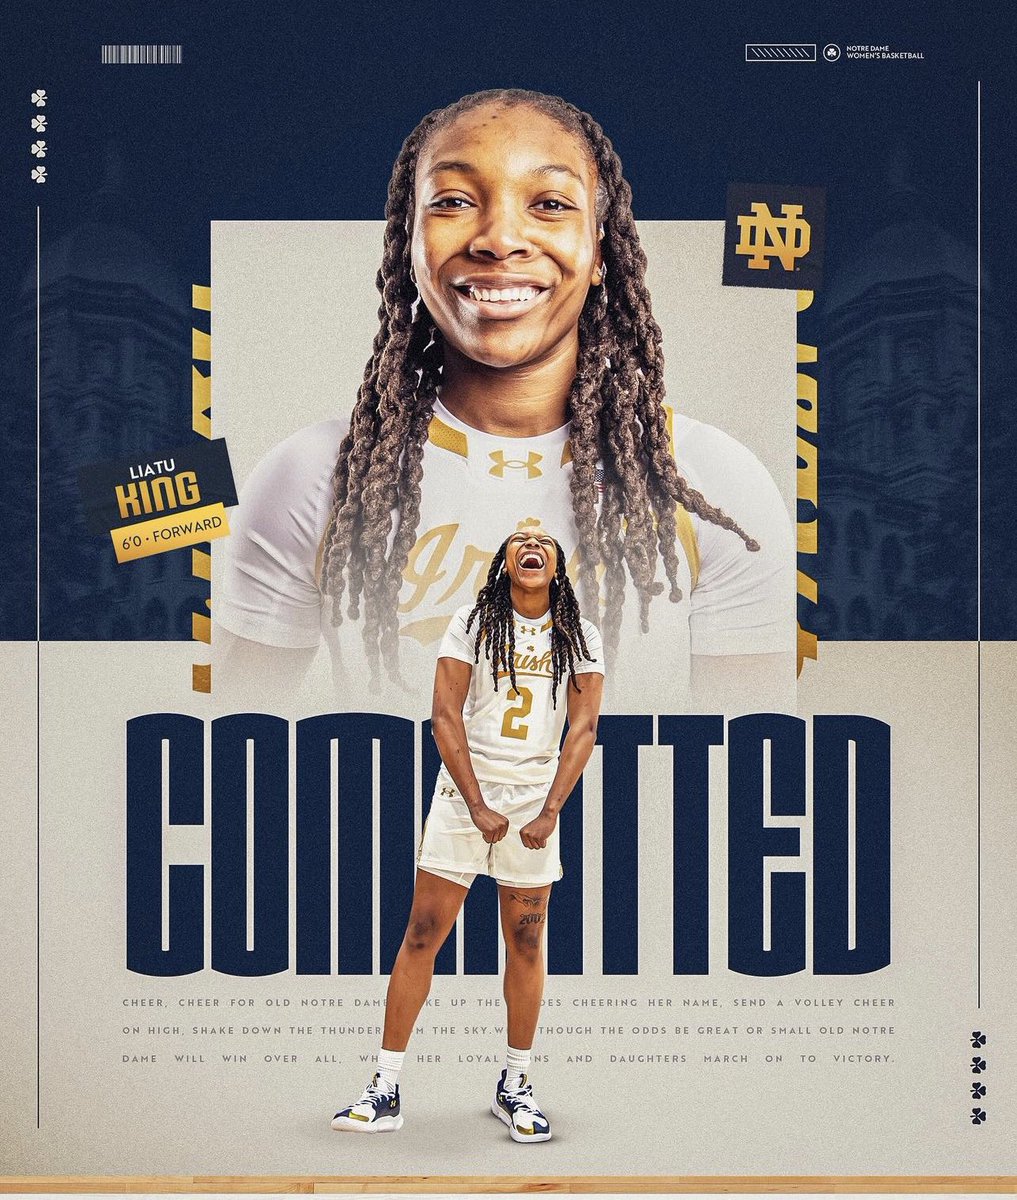 BREAKING: Liatu King (6’0 PF/Pittsburgh) has transferred to Notre Dame!

King averaged (18.7) points, (10.3) rebounds, and (1.8) steals this past season. 👀